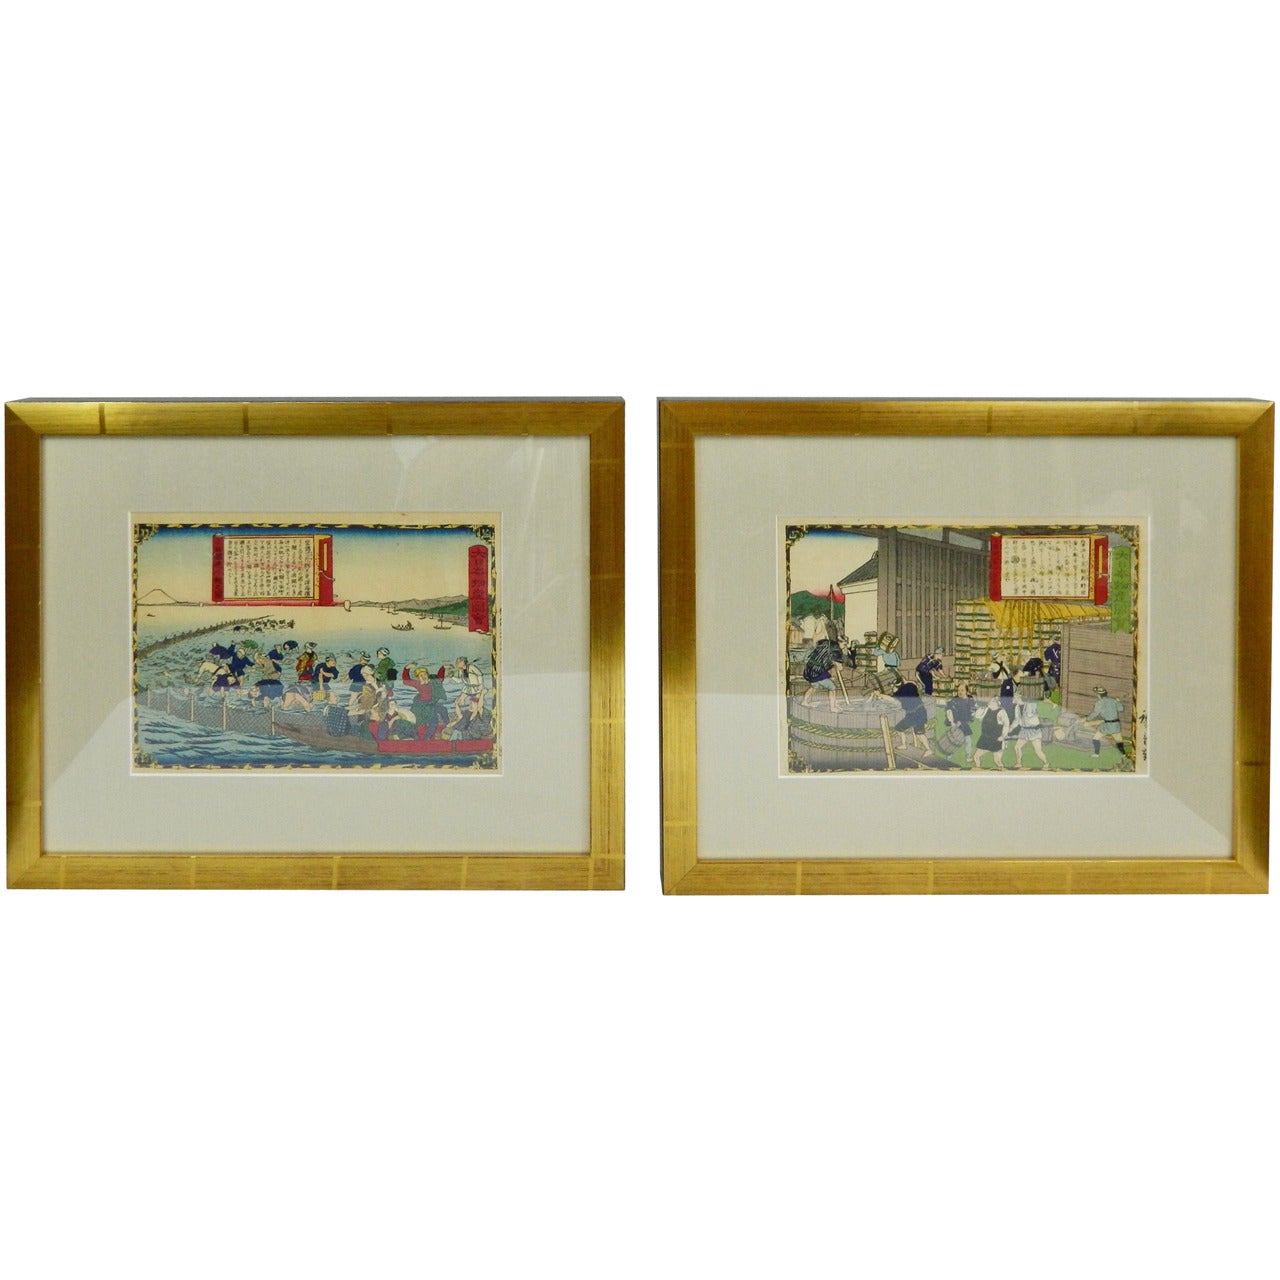 Group of Five Framed Japanese Wood Block Prints, 19th Century